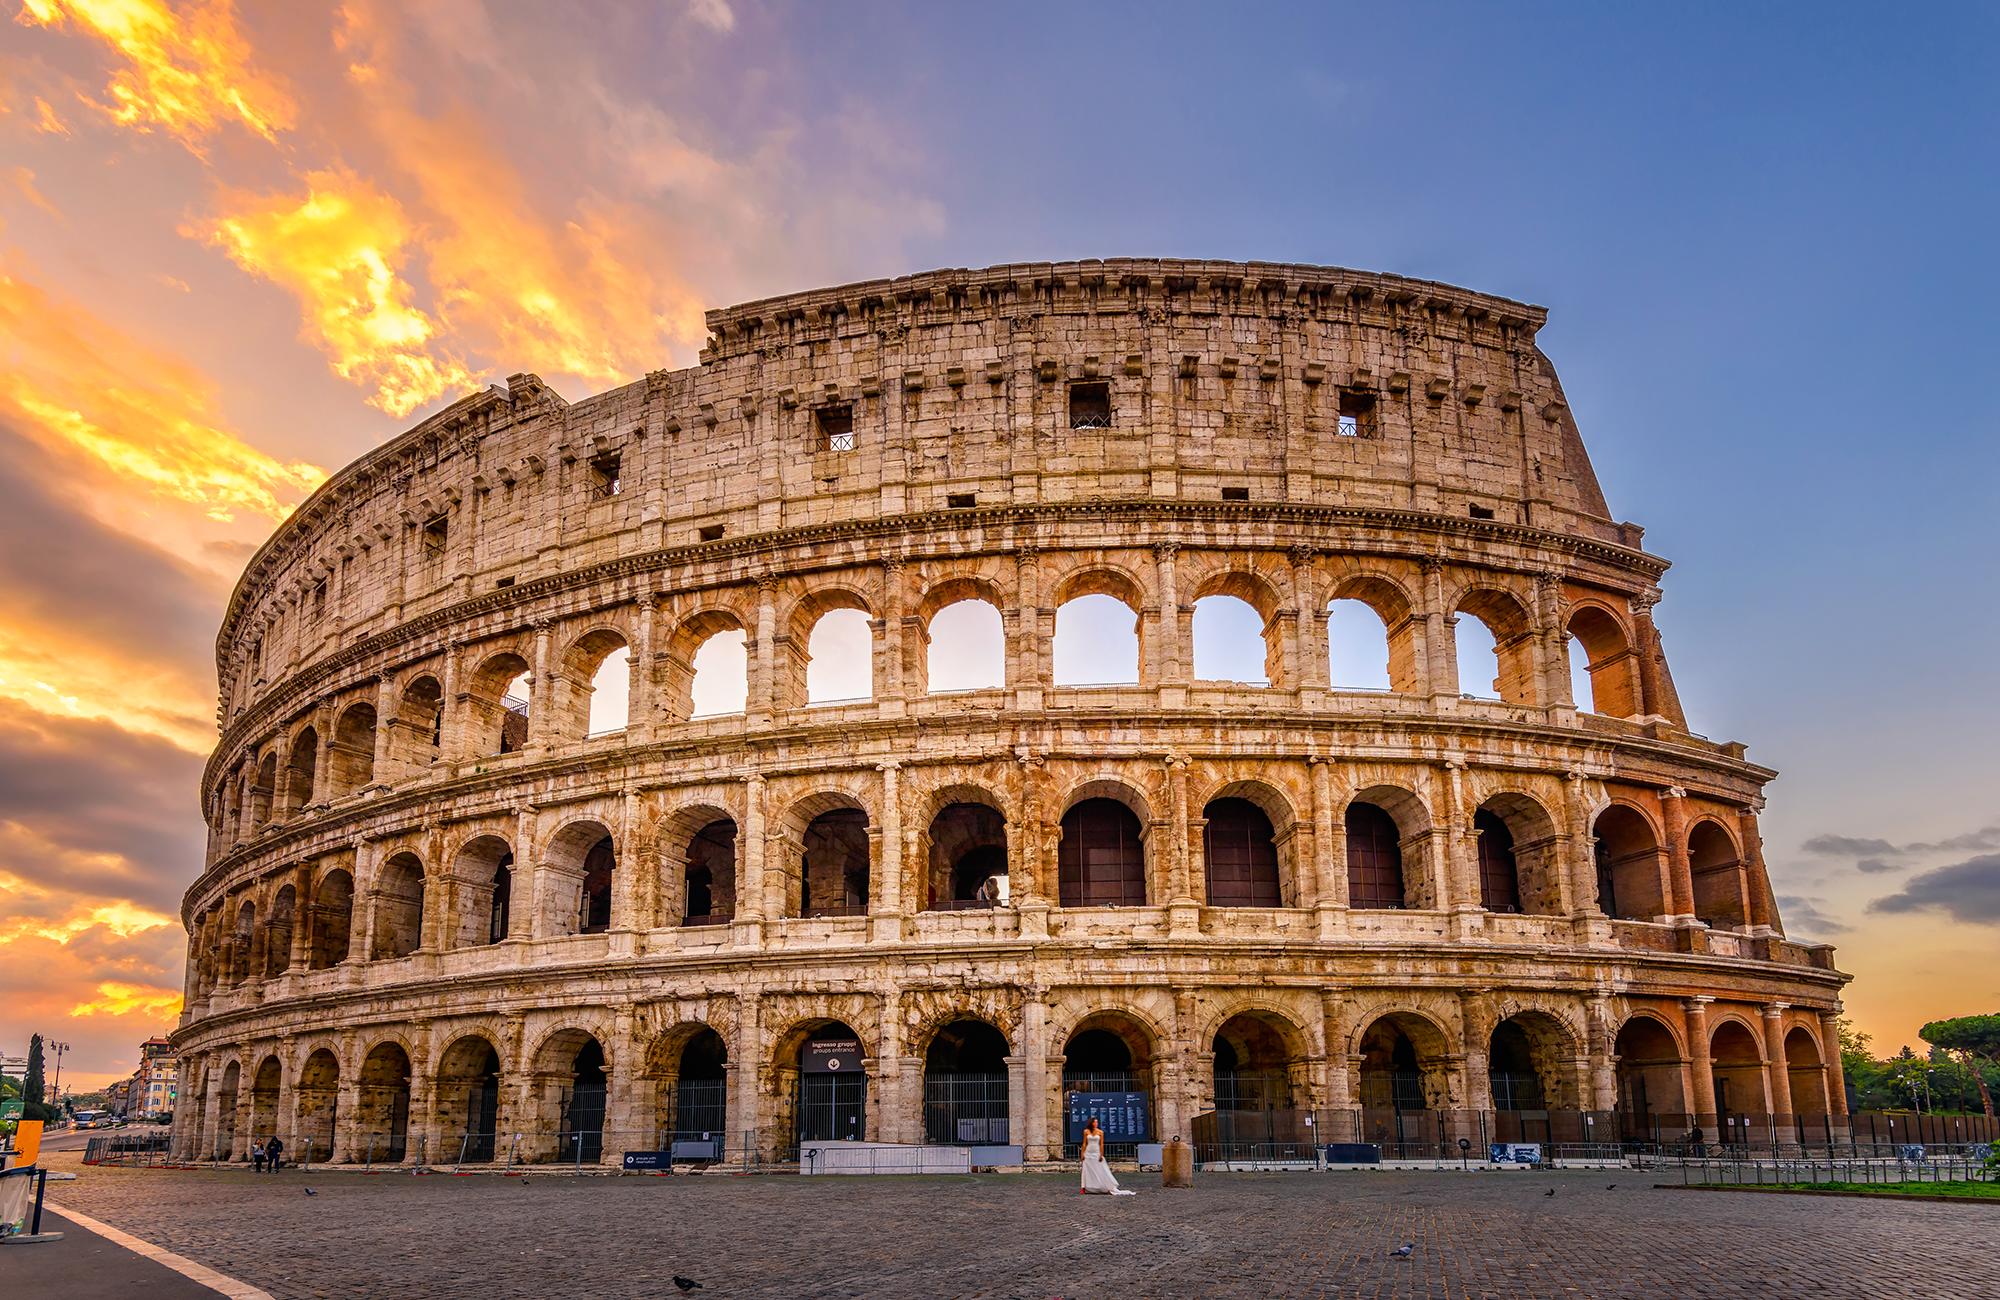 New York to Rome Italy $393 RT Airfares on TAP Air Portugal (Travel January - March 2023)